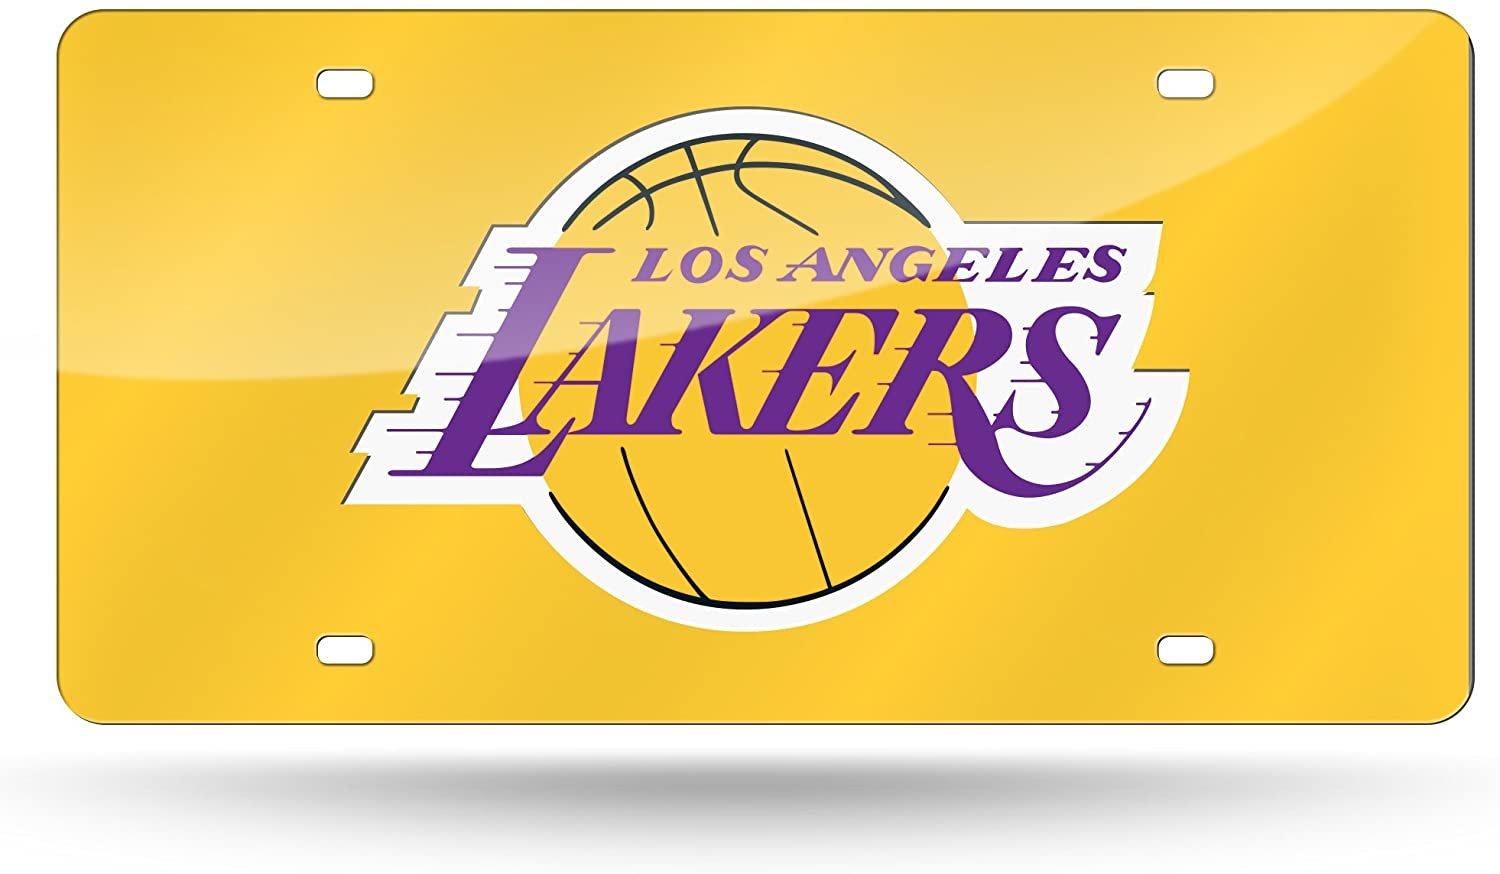 Los Angeles Lakers Premium Laser Cut Tag License Plate, Yellow, Mirrored Acrylic Inlaid, 12x6 Inch